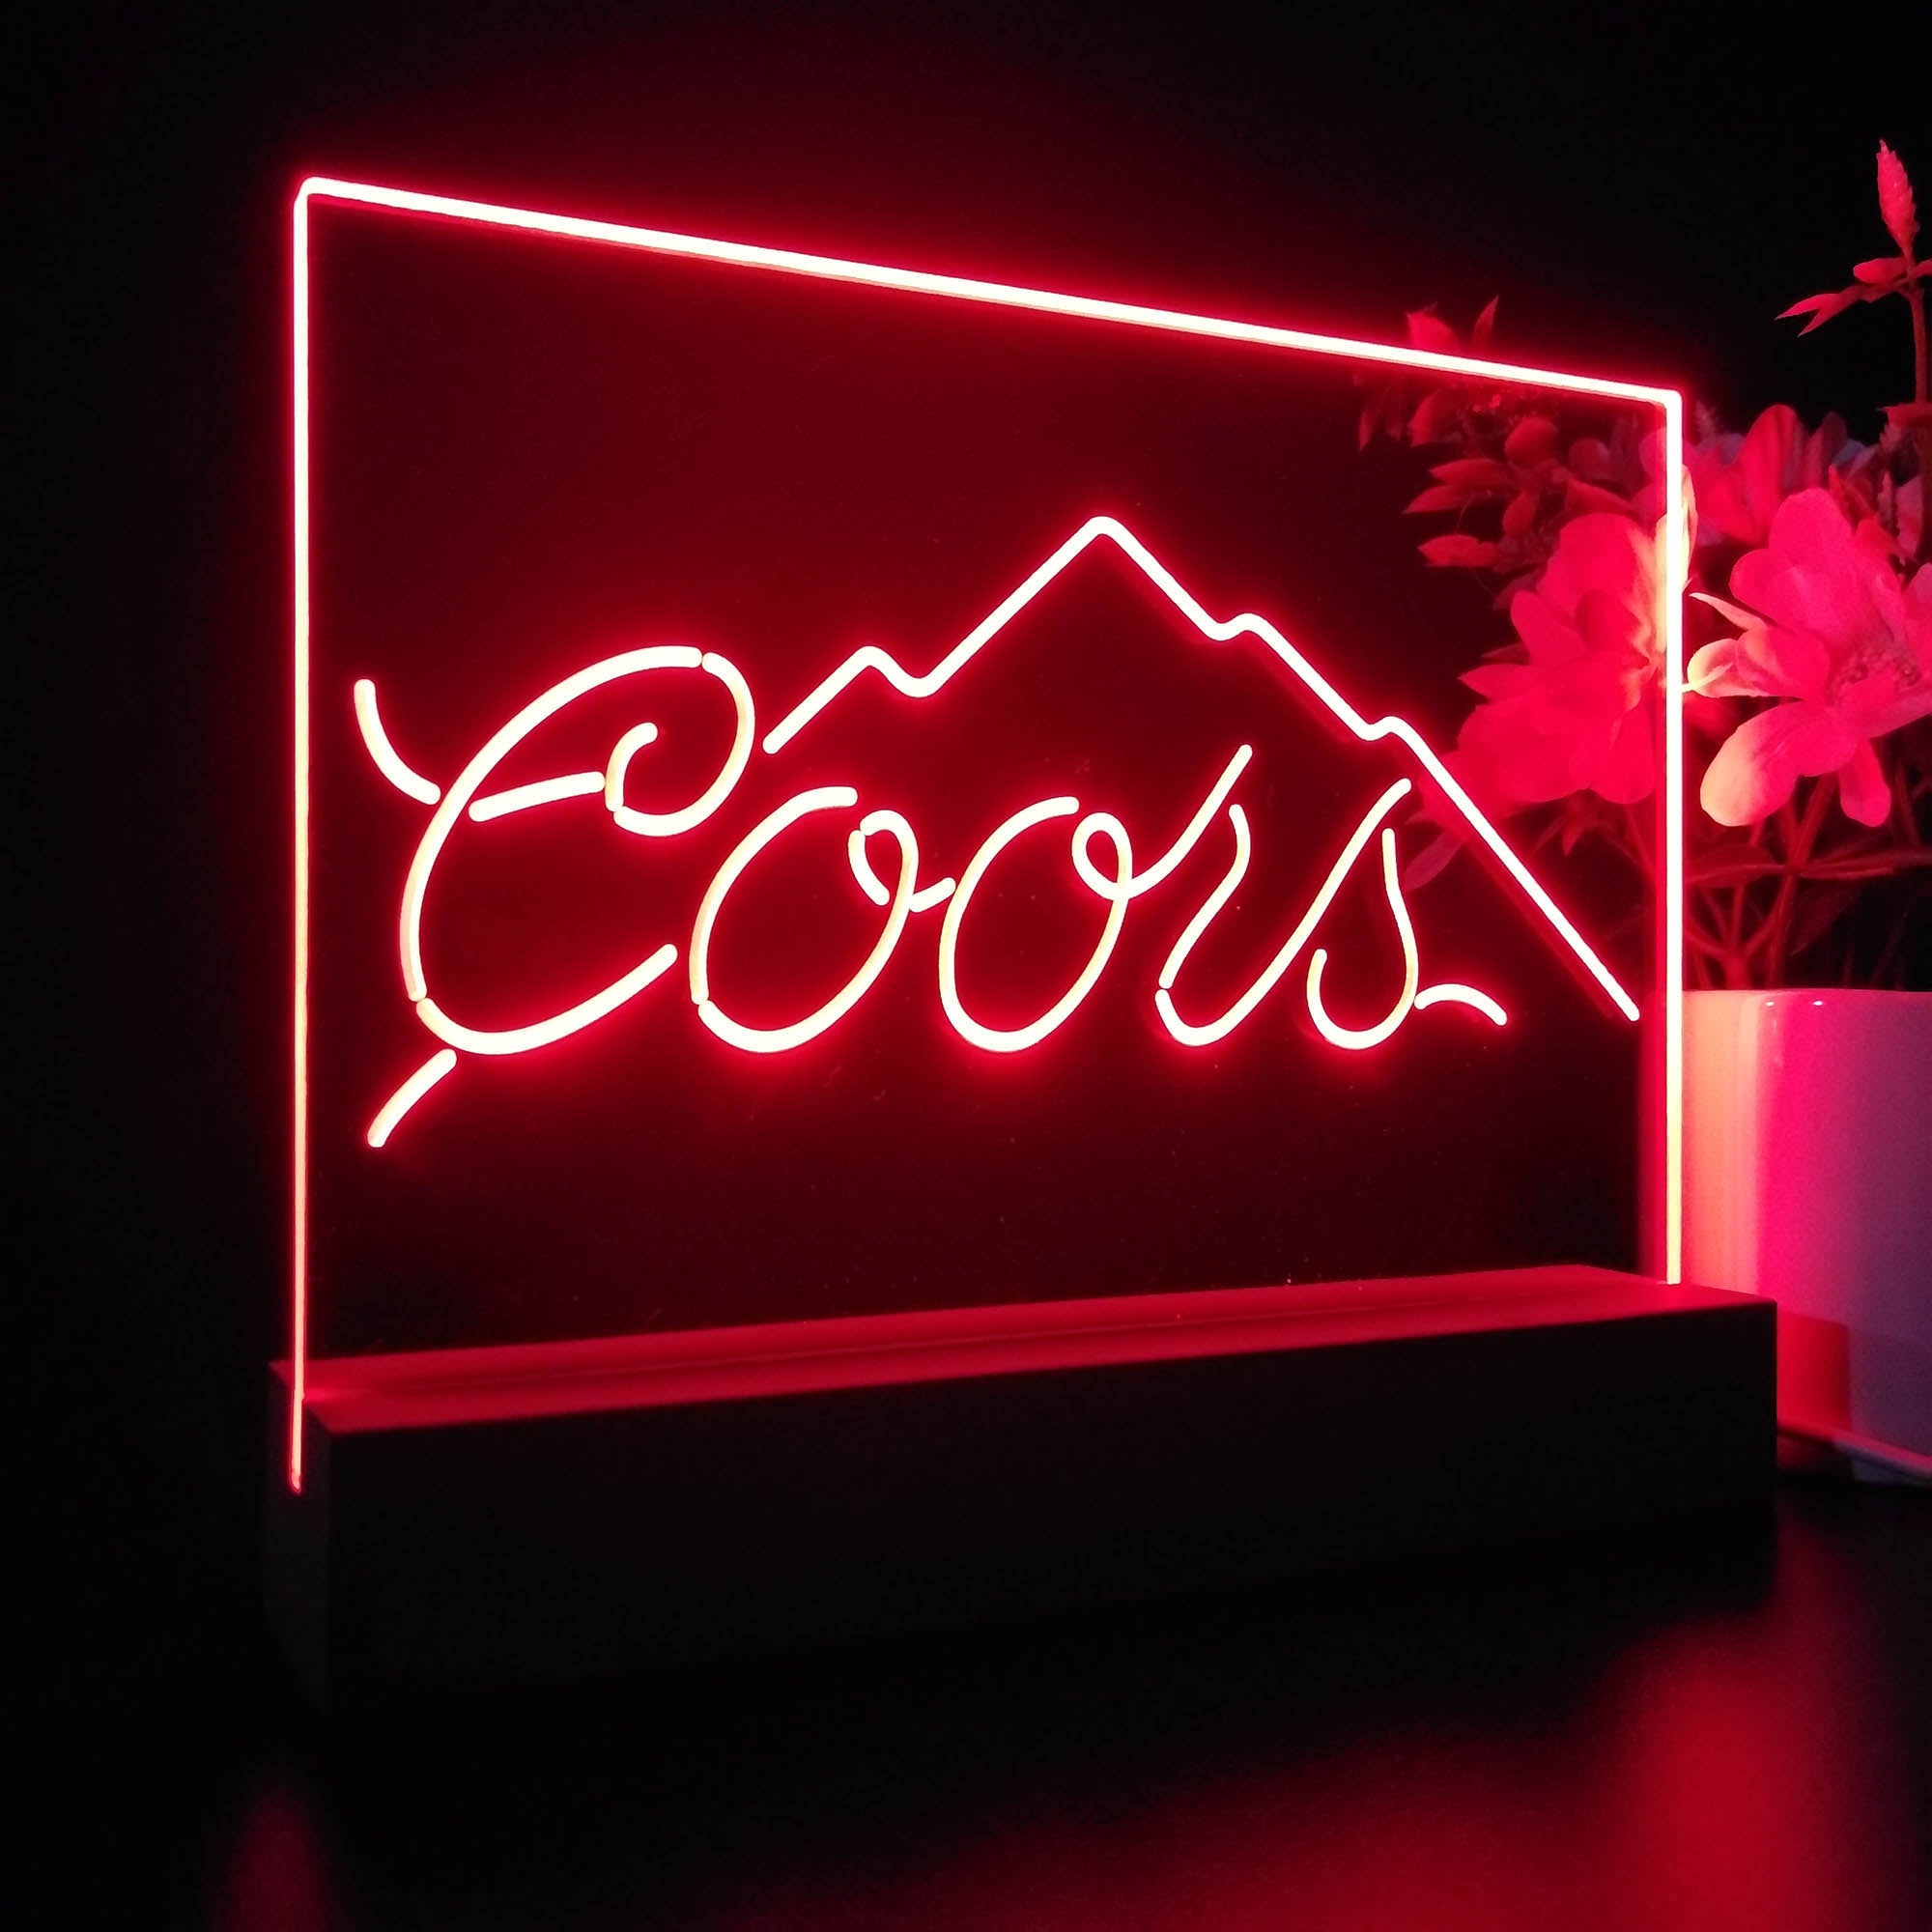 Coors Mountain Beer Night Light LED Sign